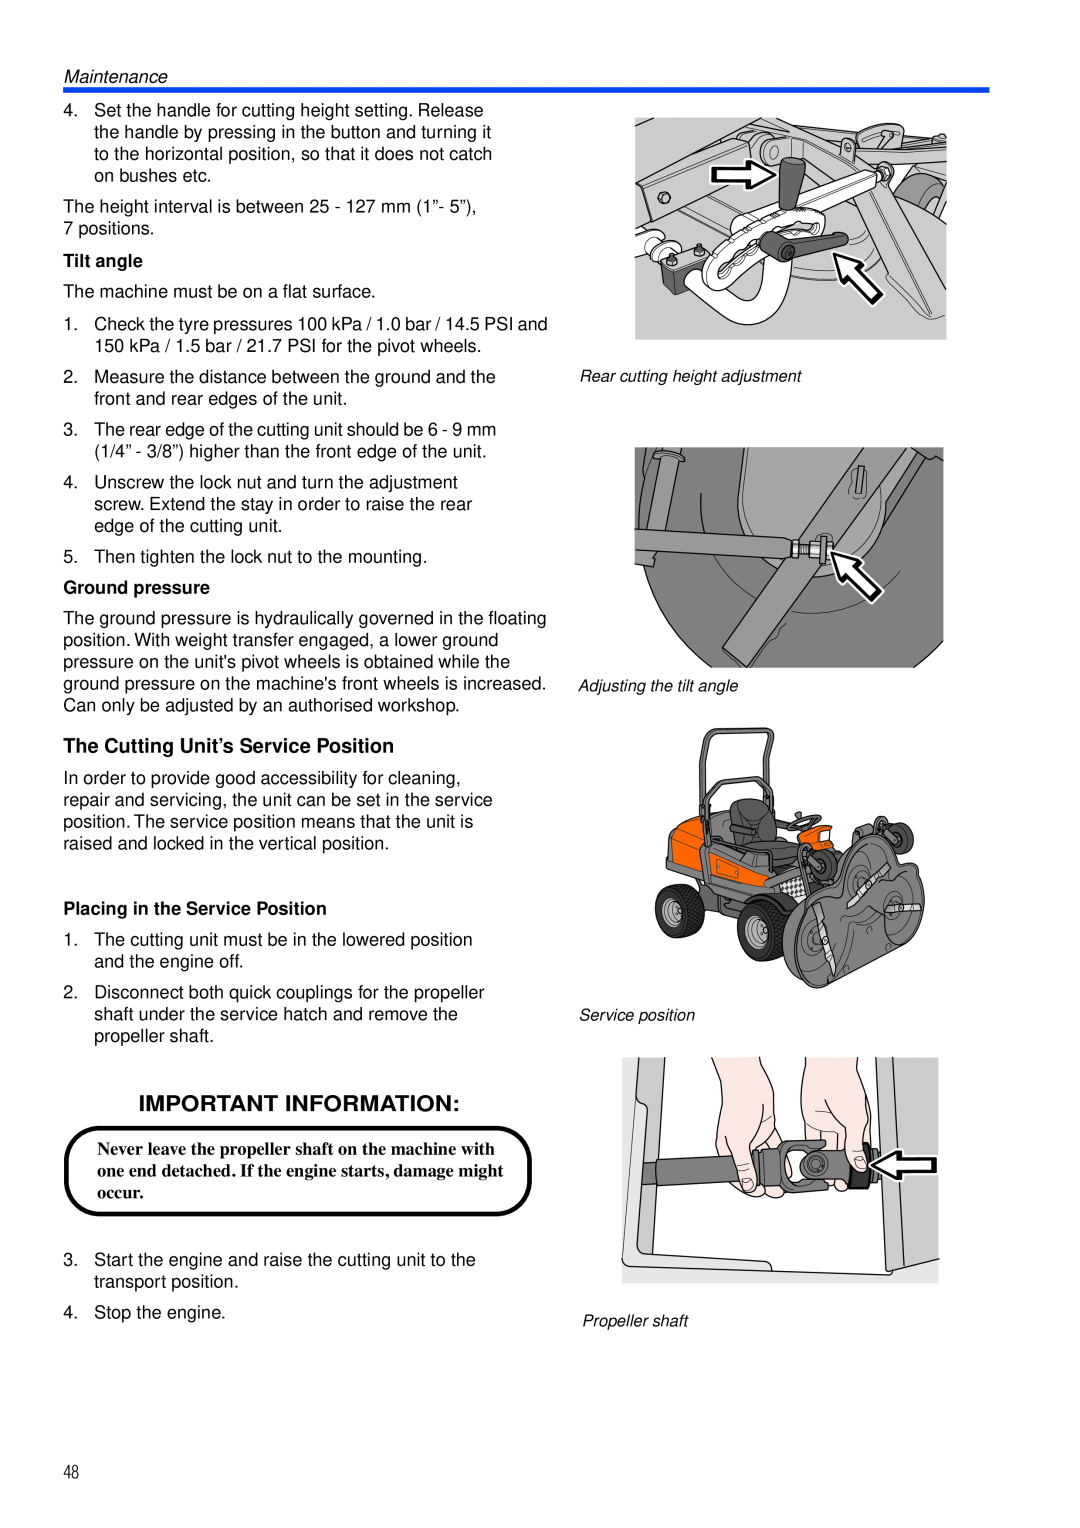 Husqvarna PT26 D manual The Cutting Unit’s Service Position, Tilt angle, Ground pressure, Placing in the Service Position 